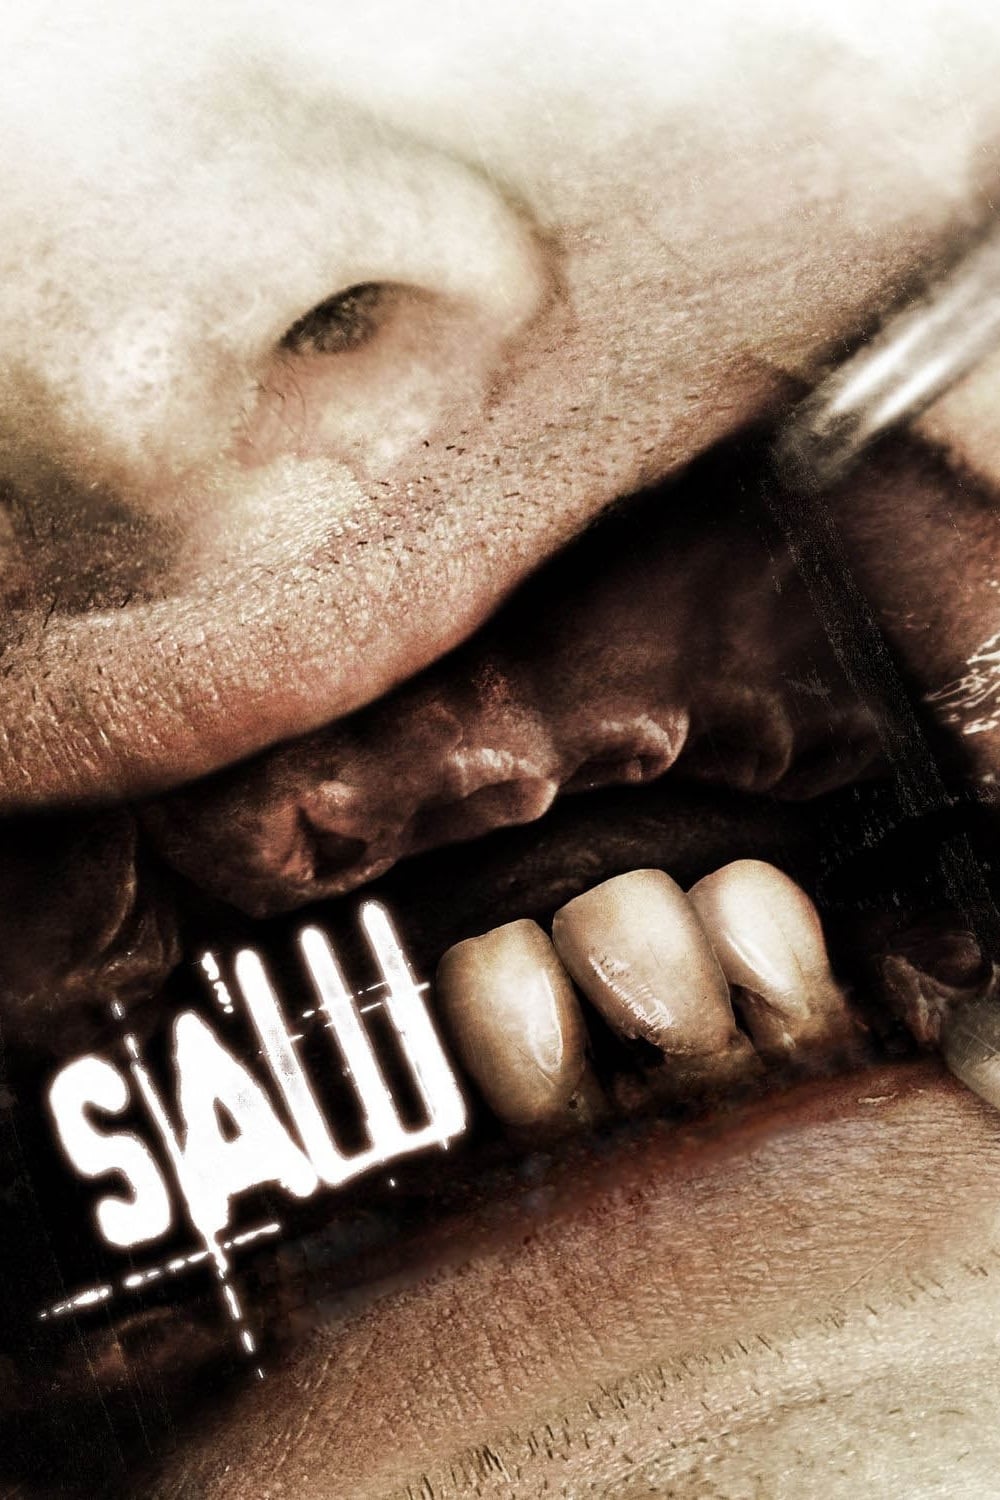 Saw III Movie Poster High Quality Glossy Paper A1 A2 A3 A4 A3 Framed or Unframed!!!